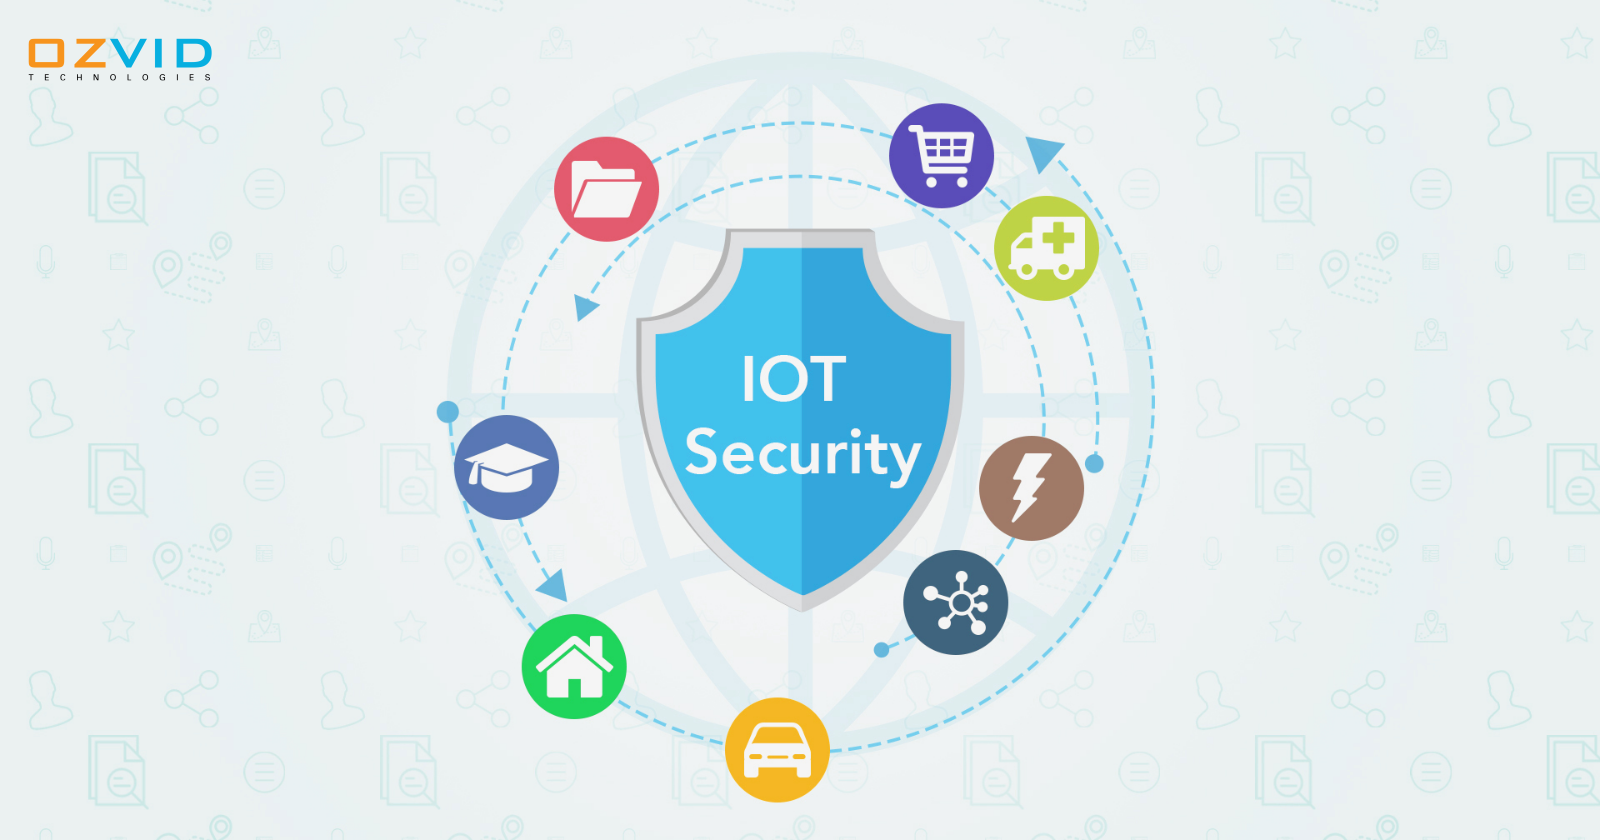 IoT Security Concerns to Consider Before Developing Mobile Applications